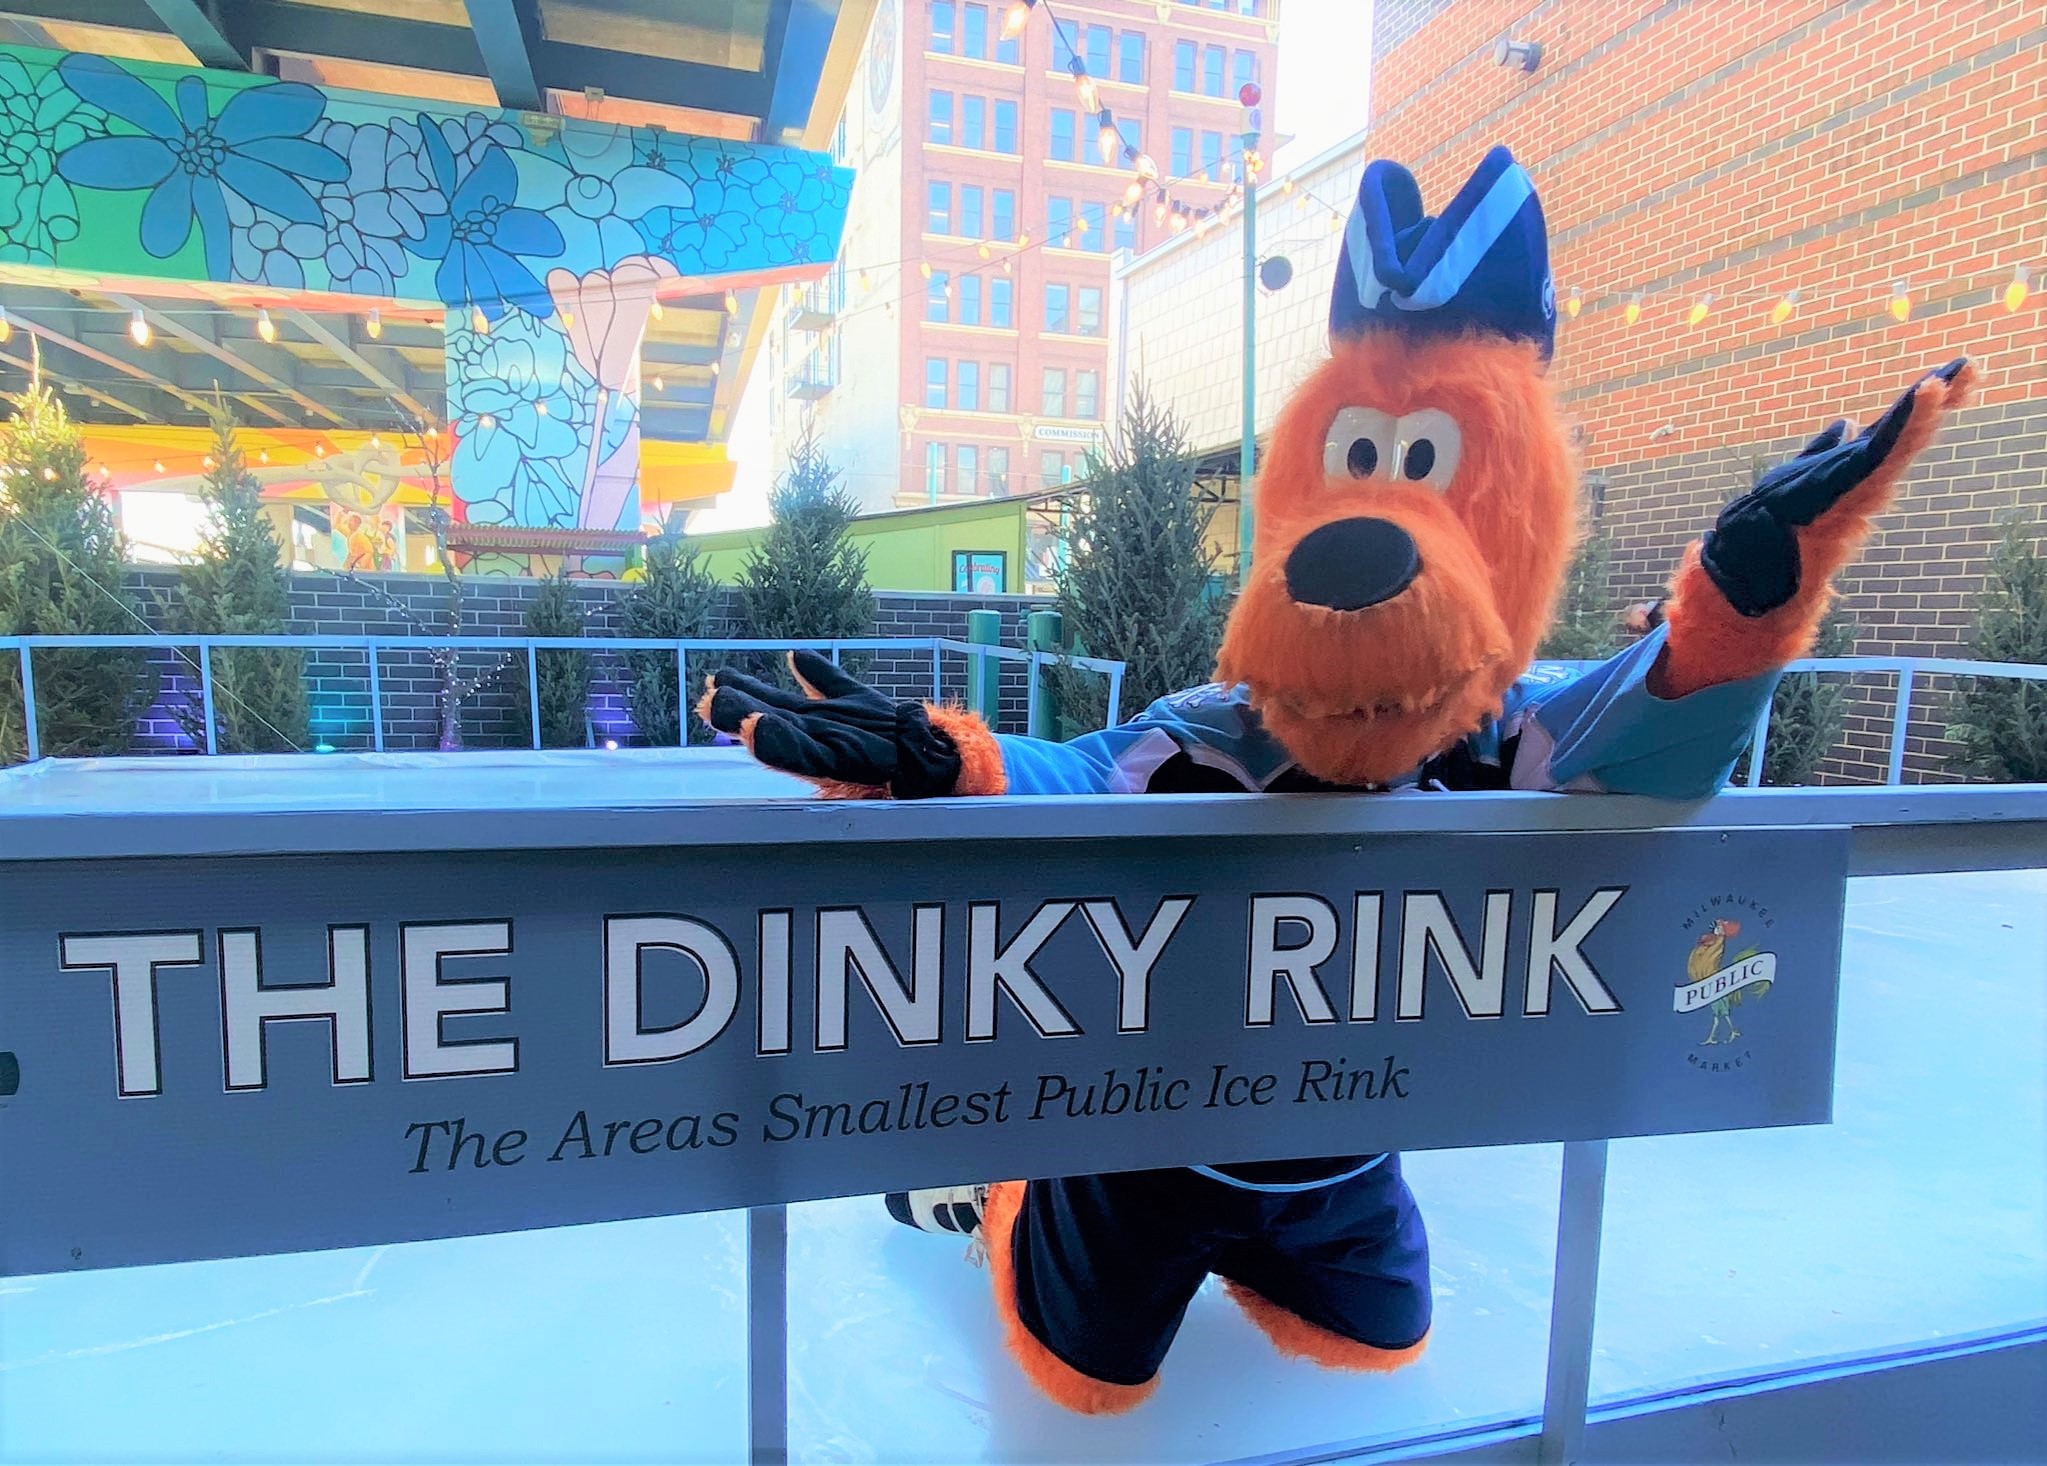 Milwaukee Public Market Sets Open Date for The Dinky Rink